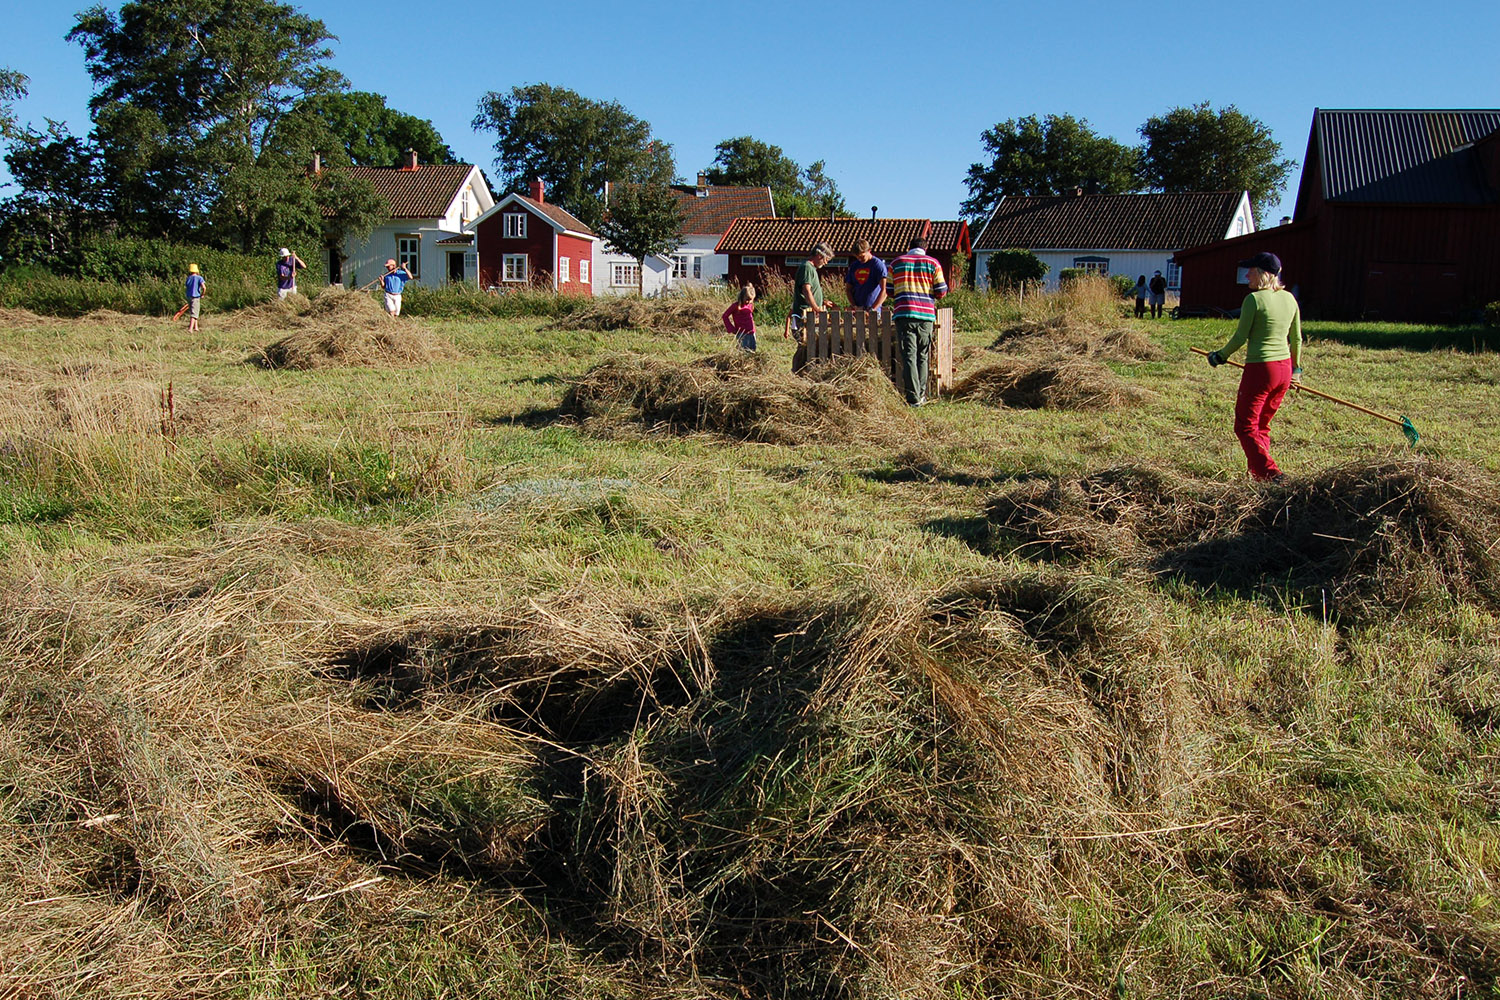 People working to collect hay at Stråholmen.